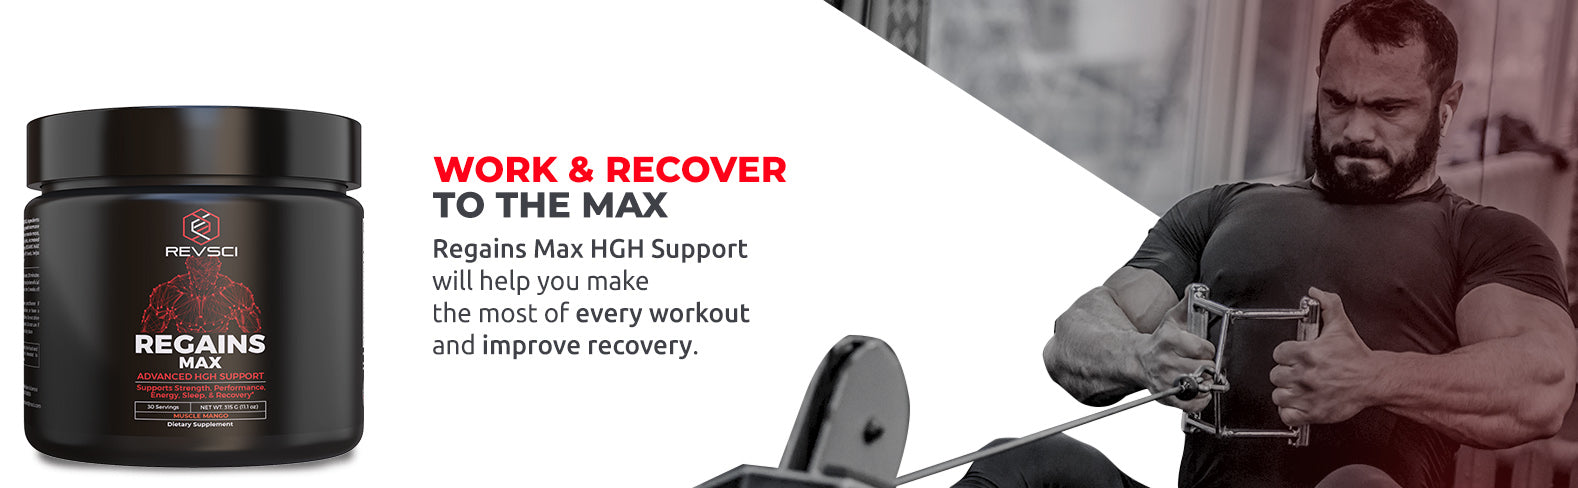 Regains MAX HGH Support - Work & Recover to the MAX